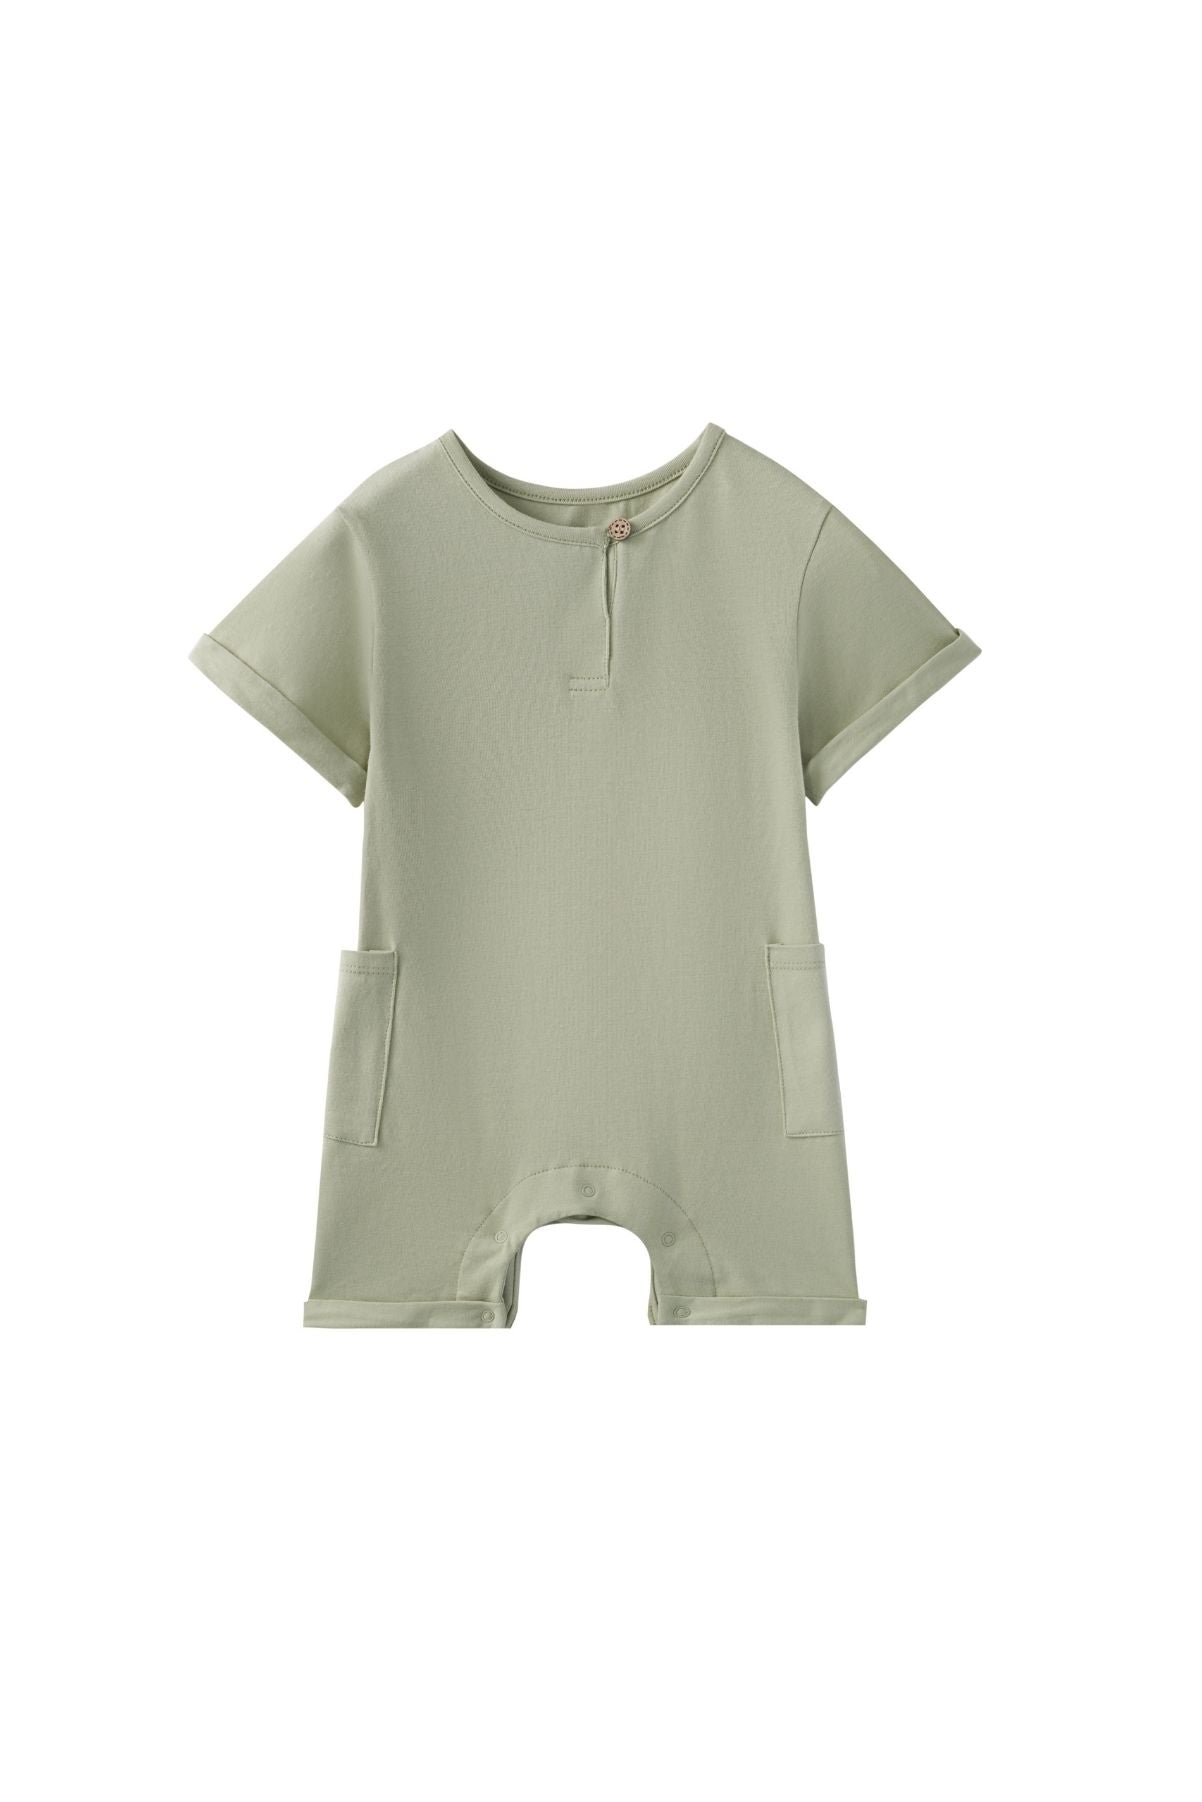 front of Baby Organic Cotton Romper-Grey Green